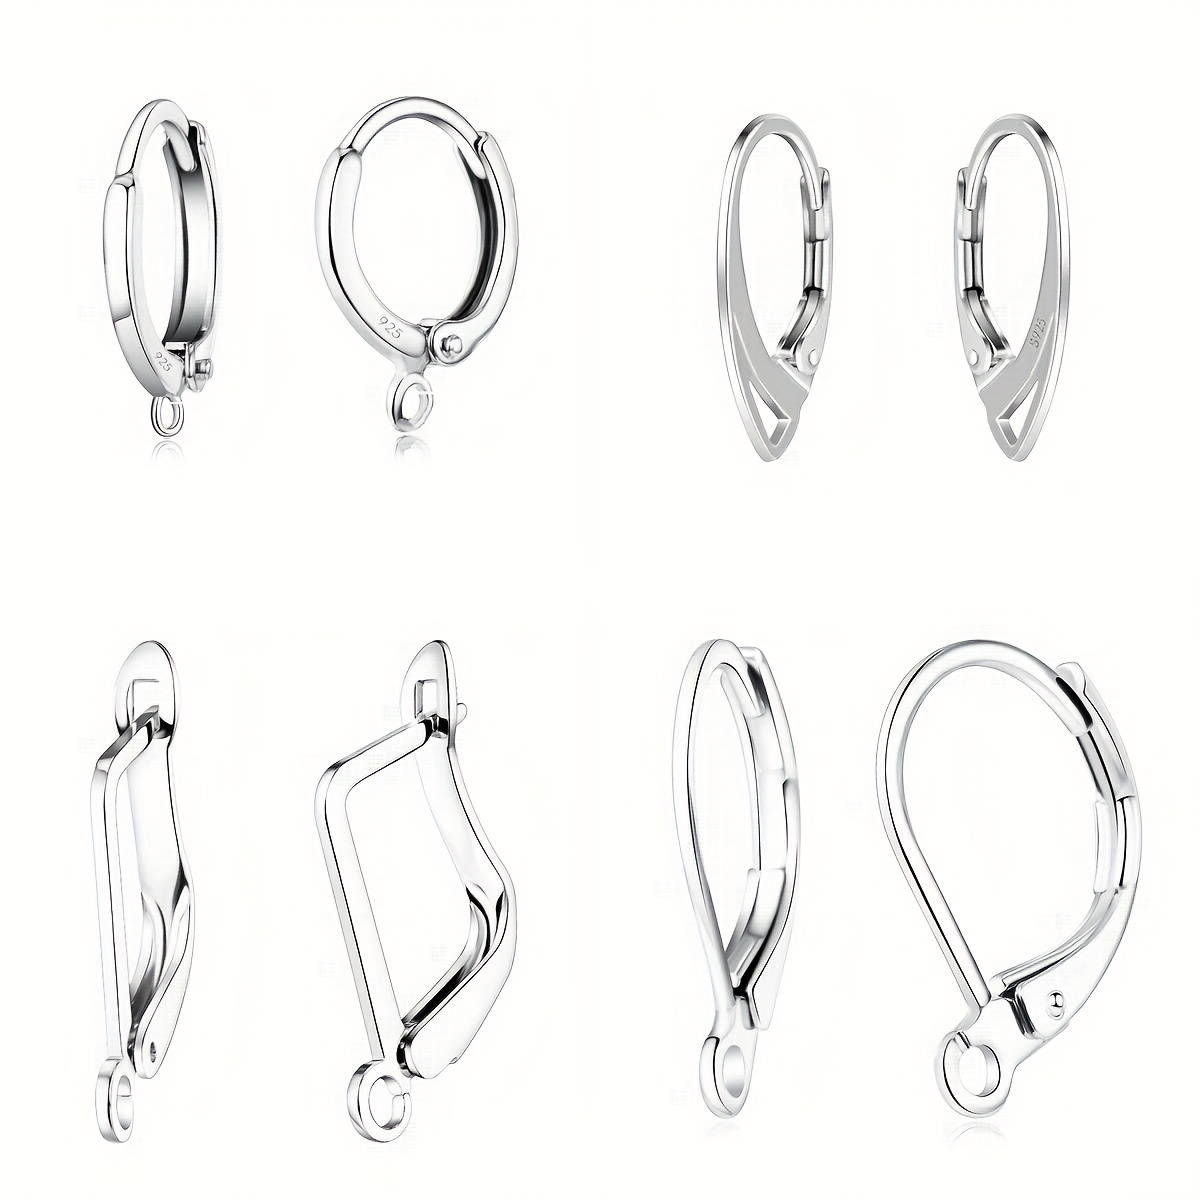 120 PCS Silver Earring Hooks Beads For DIY Jewelry Making Ear Wires  Supplies Kit